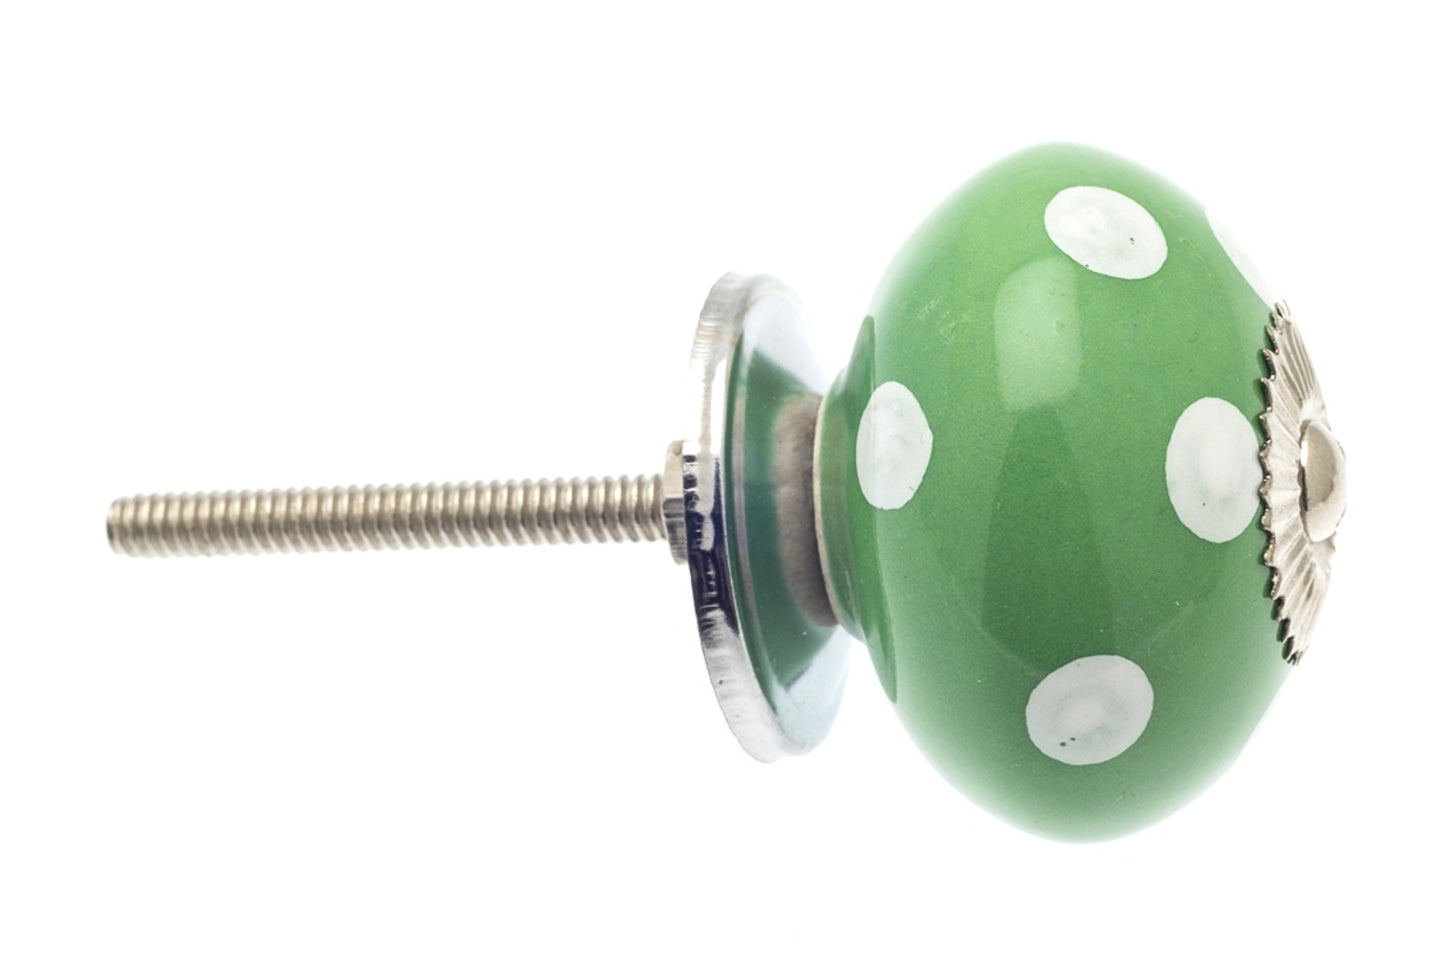 Ceramic Knob Green with White Spots / Dots 40mm